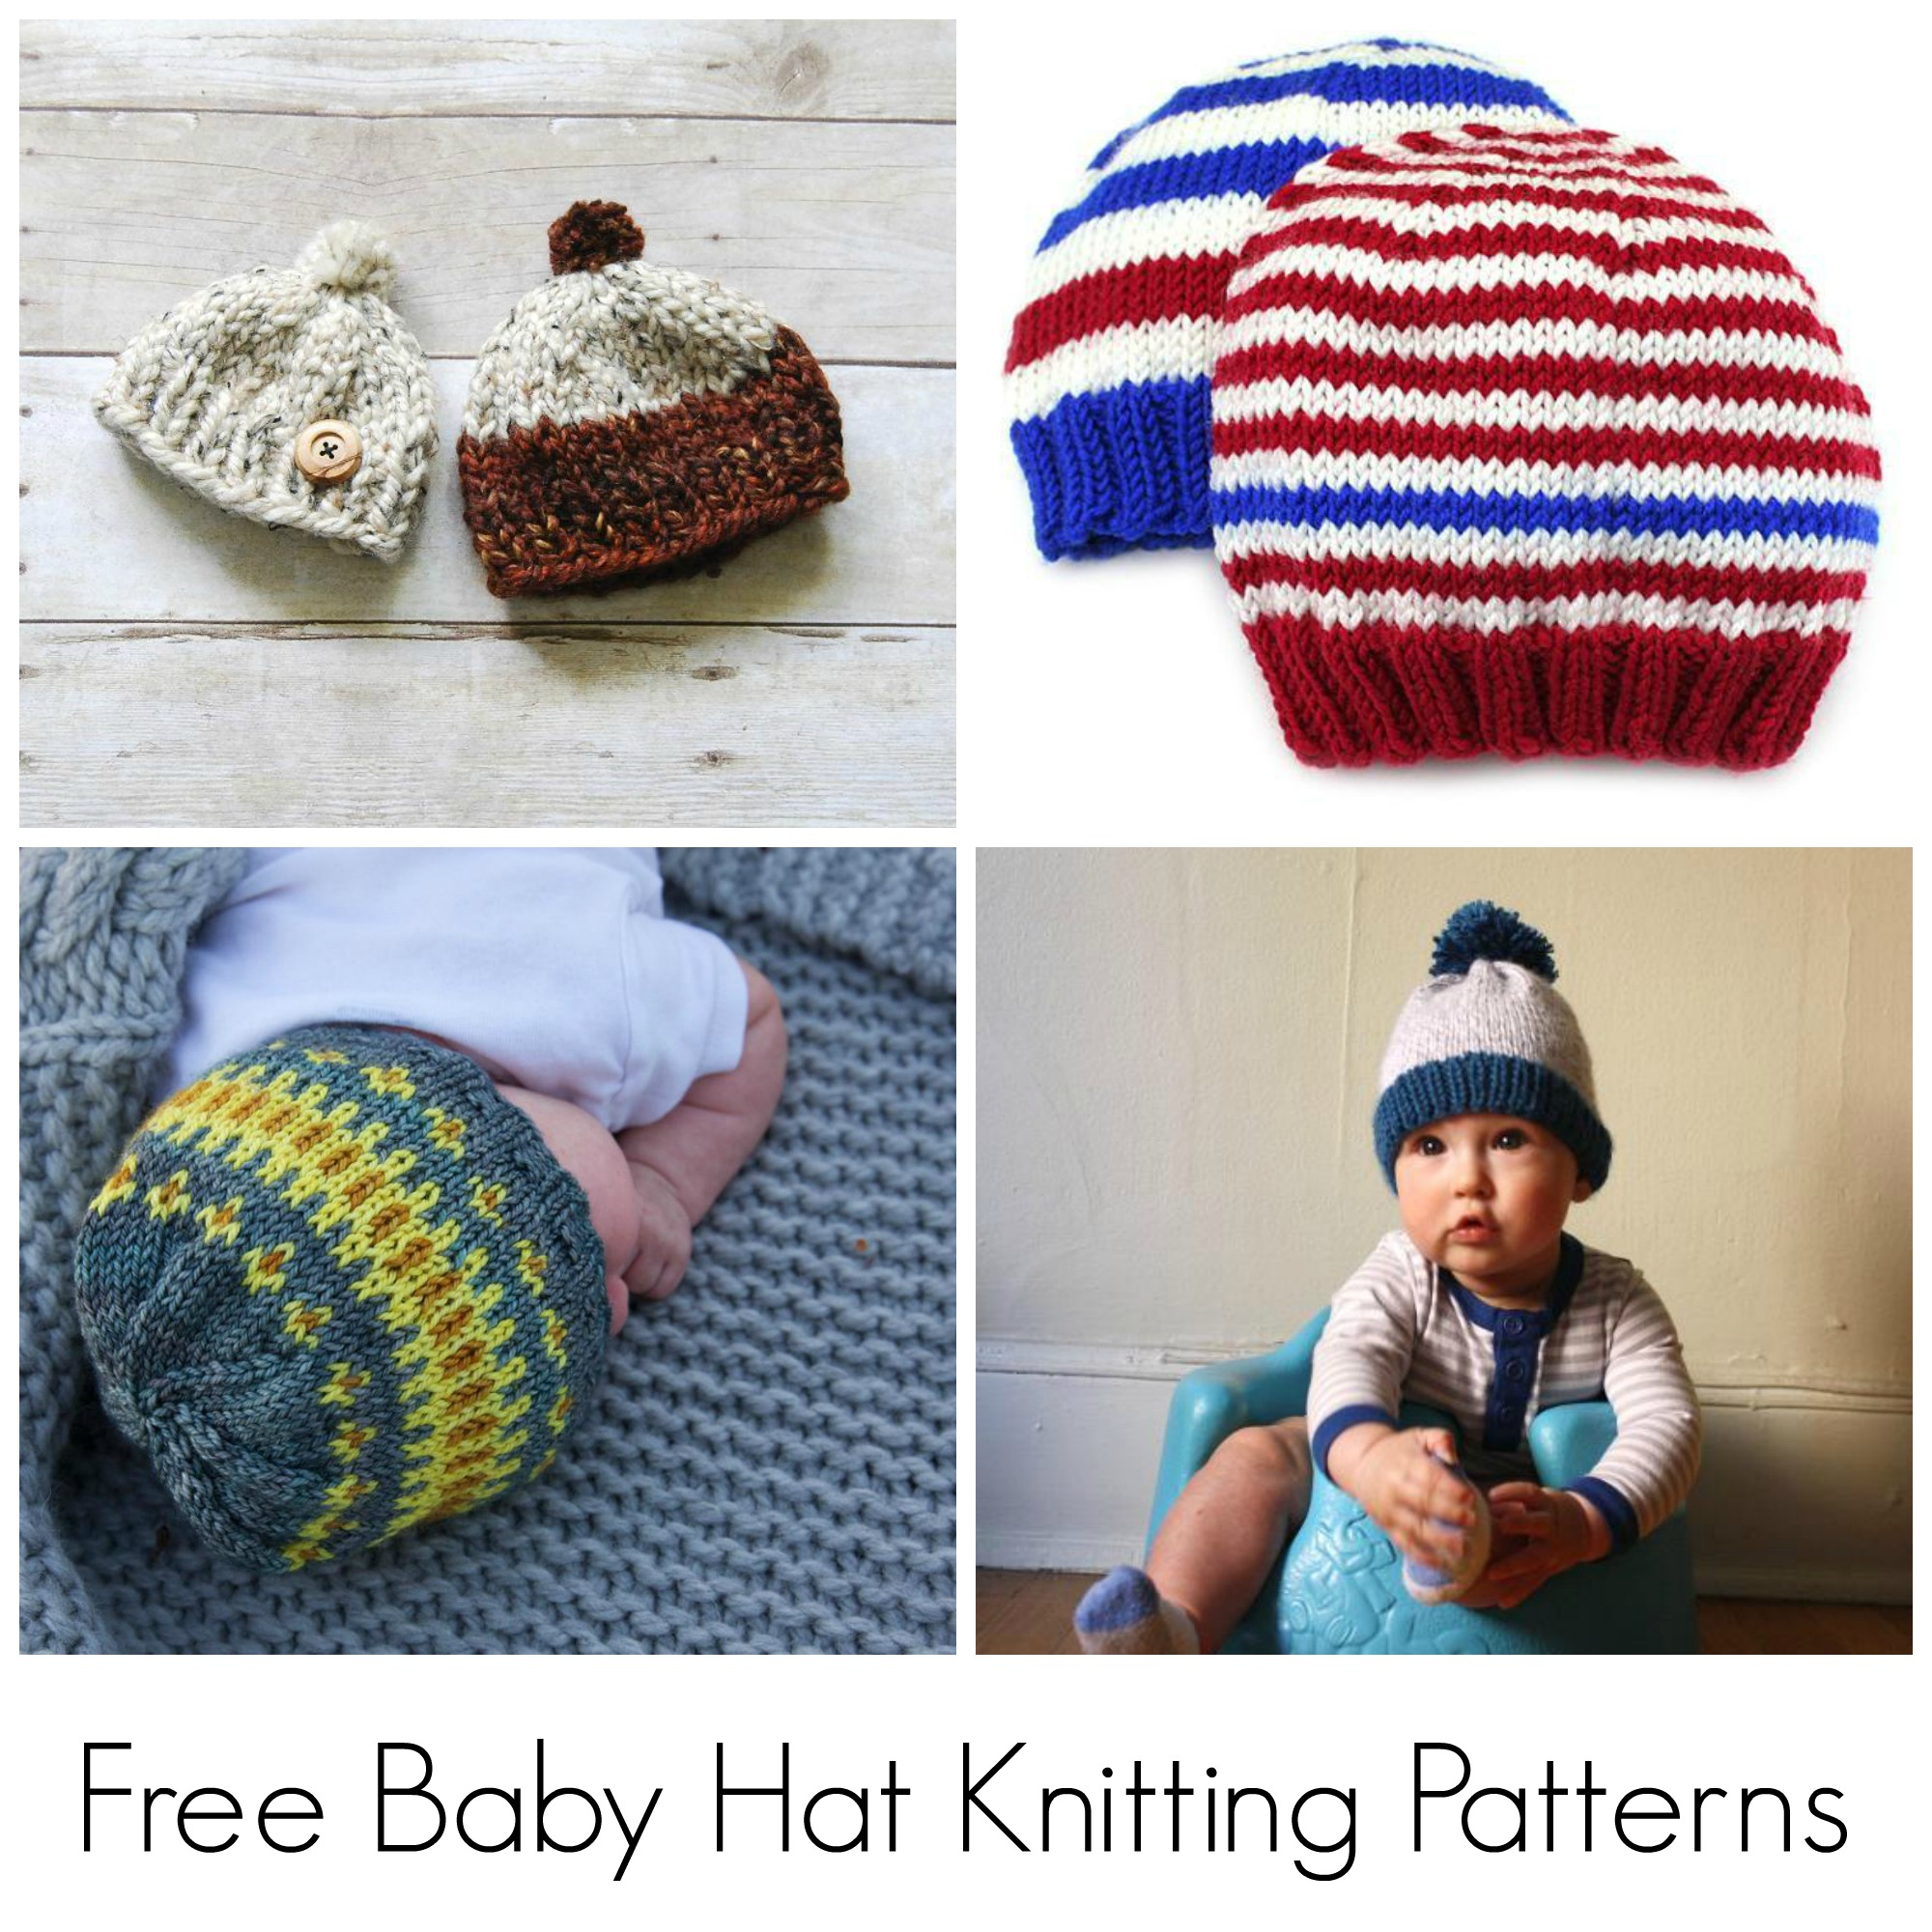 Beginner Baby Knitting Patterns 10 Free Knitting Patterns For Ba Hats On Craftsy